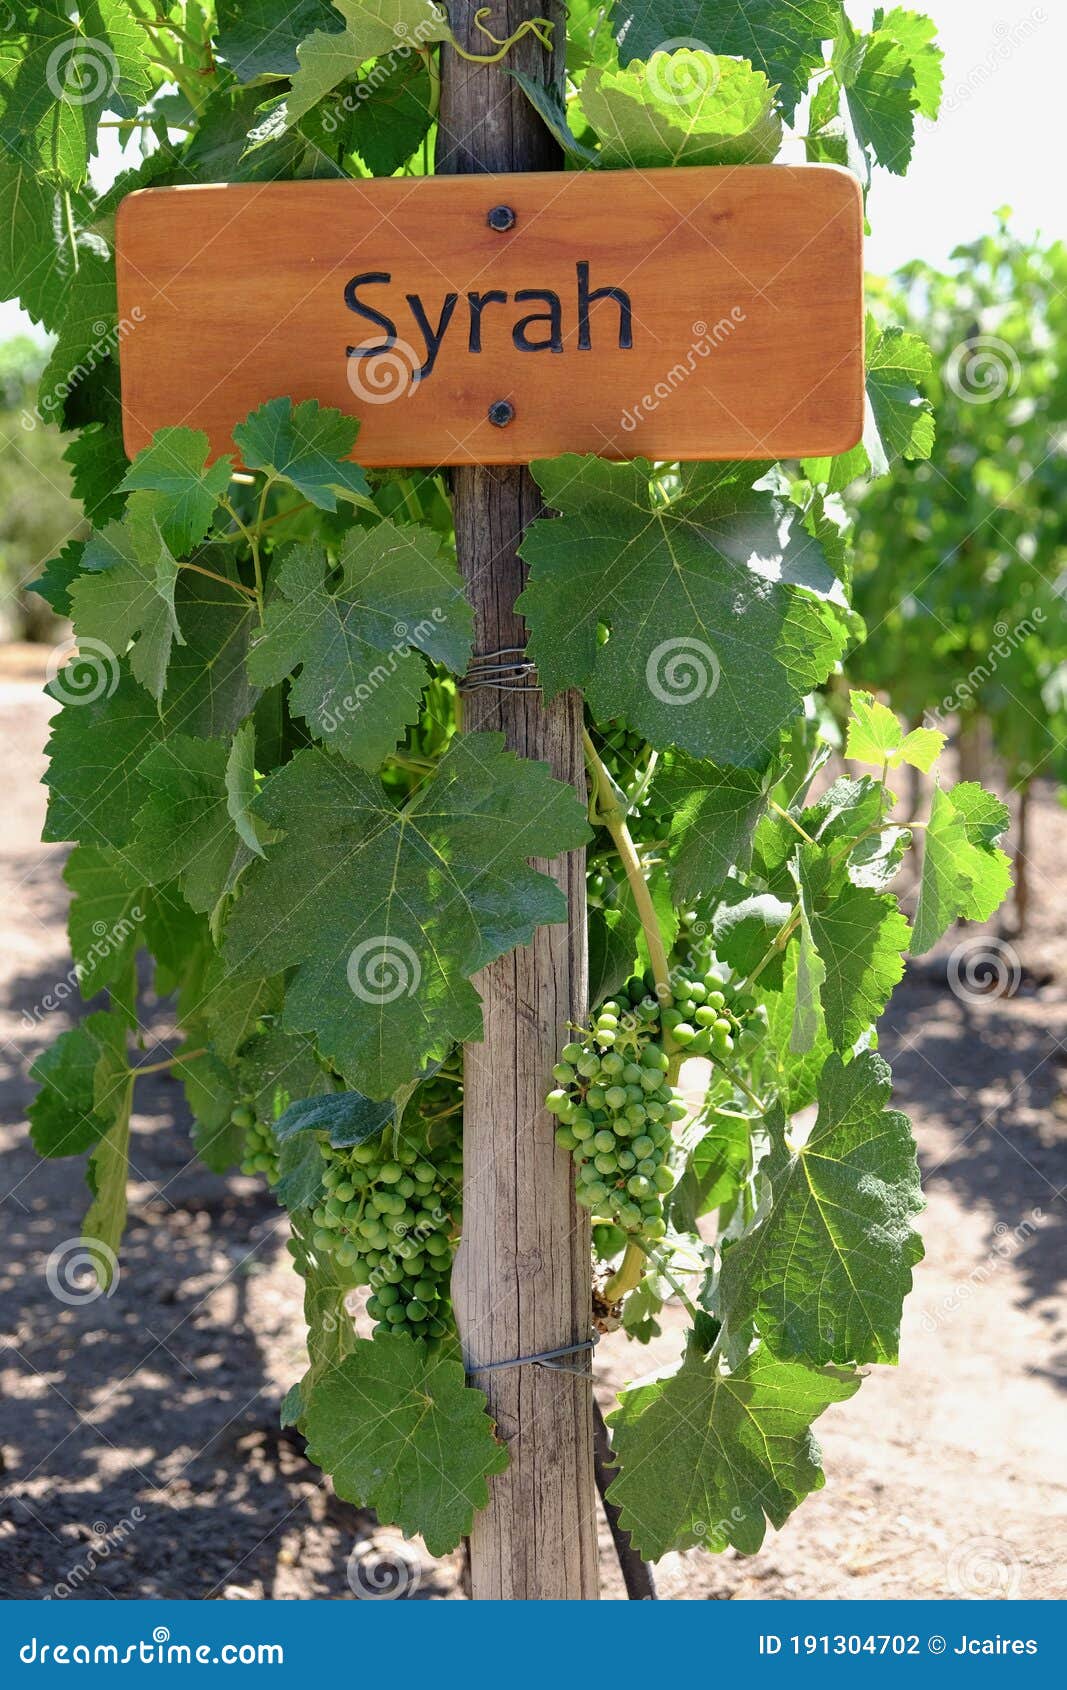 wooden sign of the syrah grape type